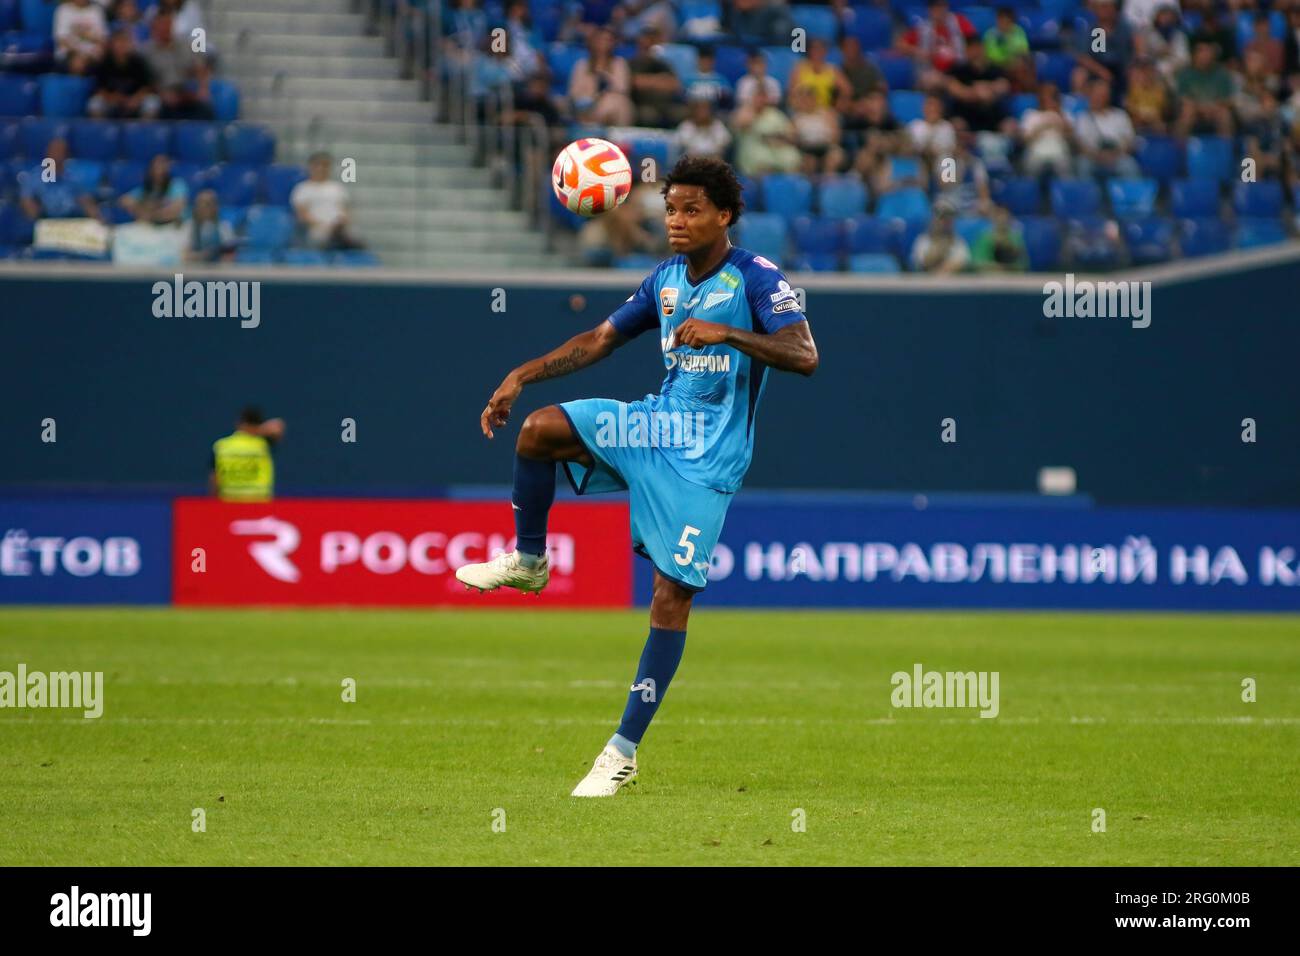 Saint Petersburg, Russia. 06th Aug, 2023. Wilmar Enrique Barrios Teran, known as Wilmar Barrios (5) of Zenit seen during the Russian Premier League football match between Zenit Saint Petersburg and Dynamo Moscow at Gazprom Arena. Zenit 2:3 Dynamo. (Photo by Maksim Konstantinov/SOPA Images/Sipa USA) Credit: Sipa USA/Alamy Live News Stock Photo